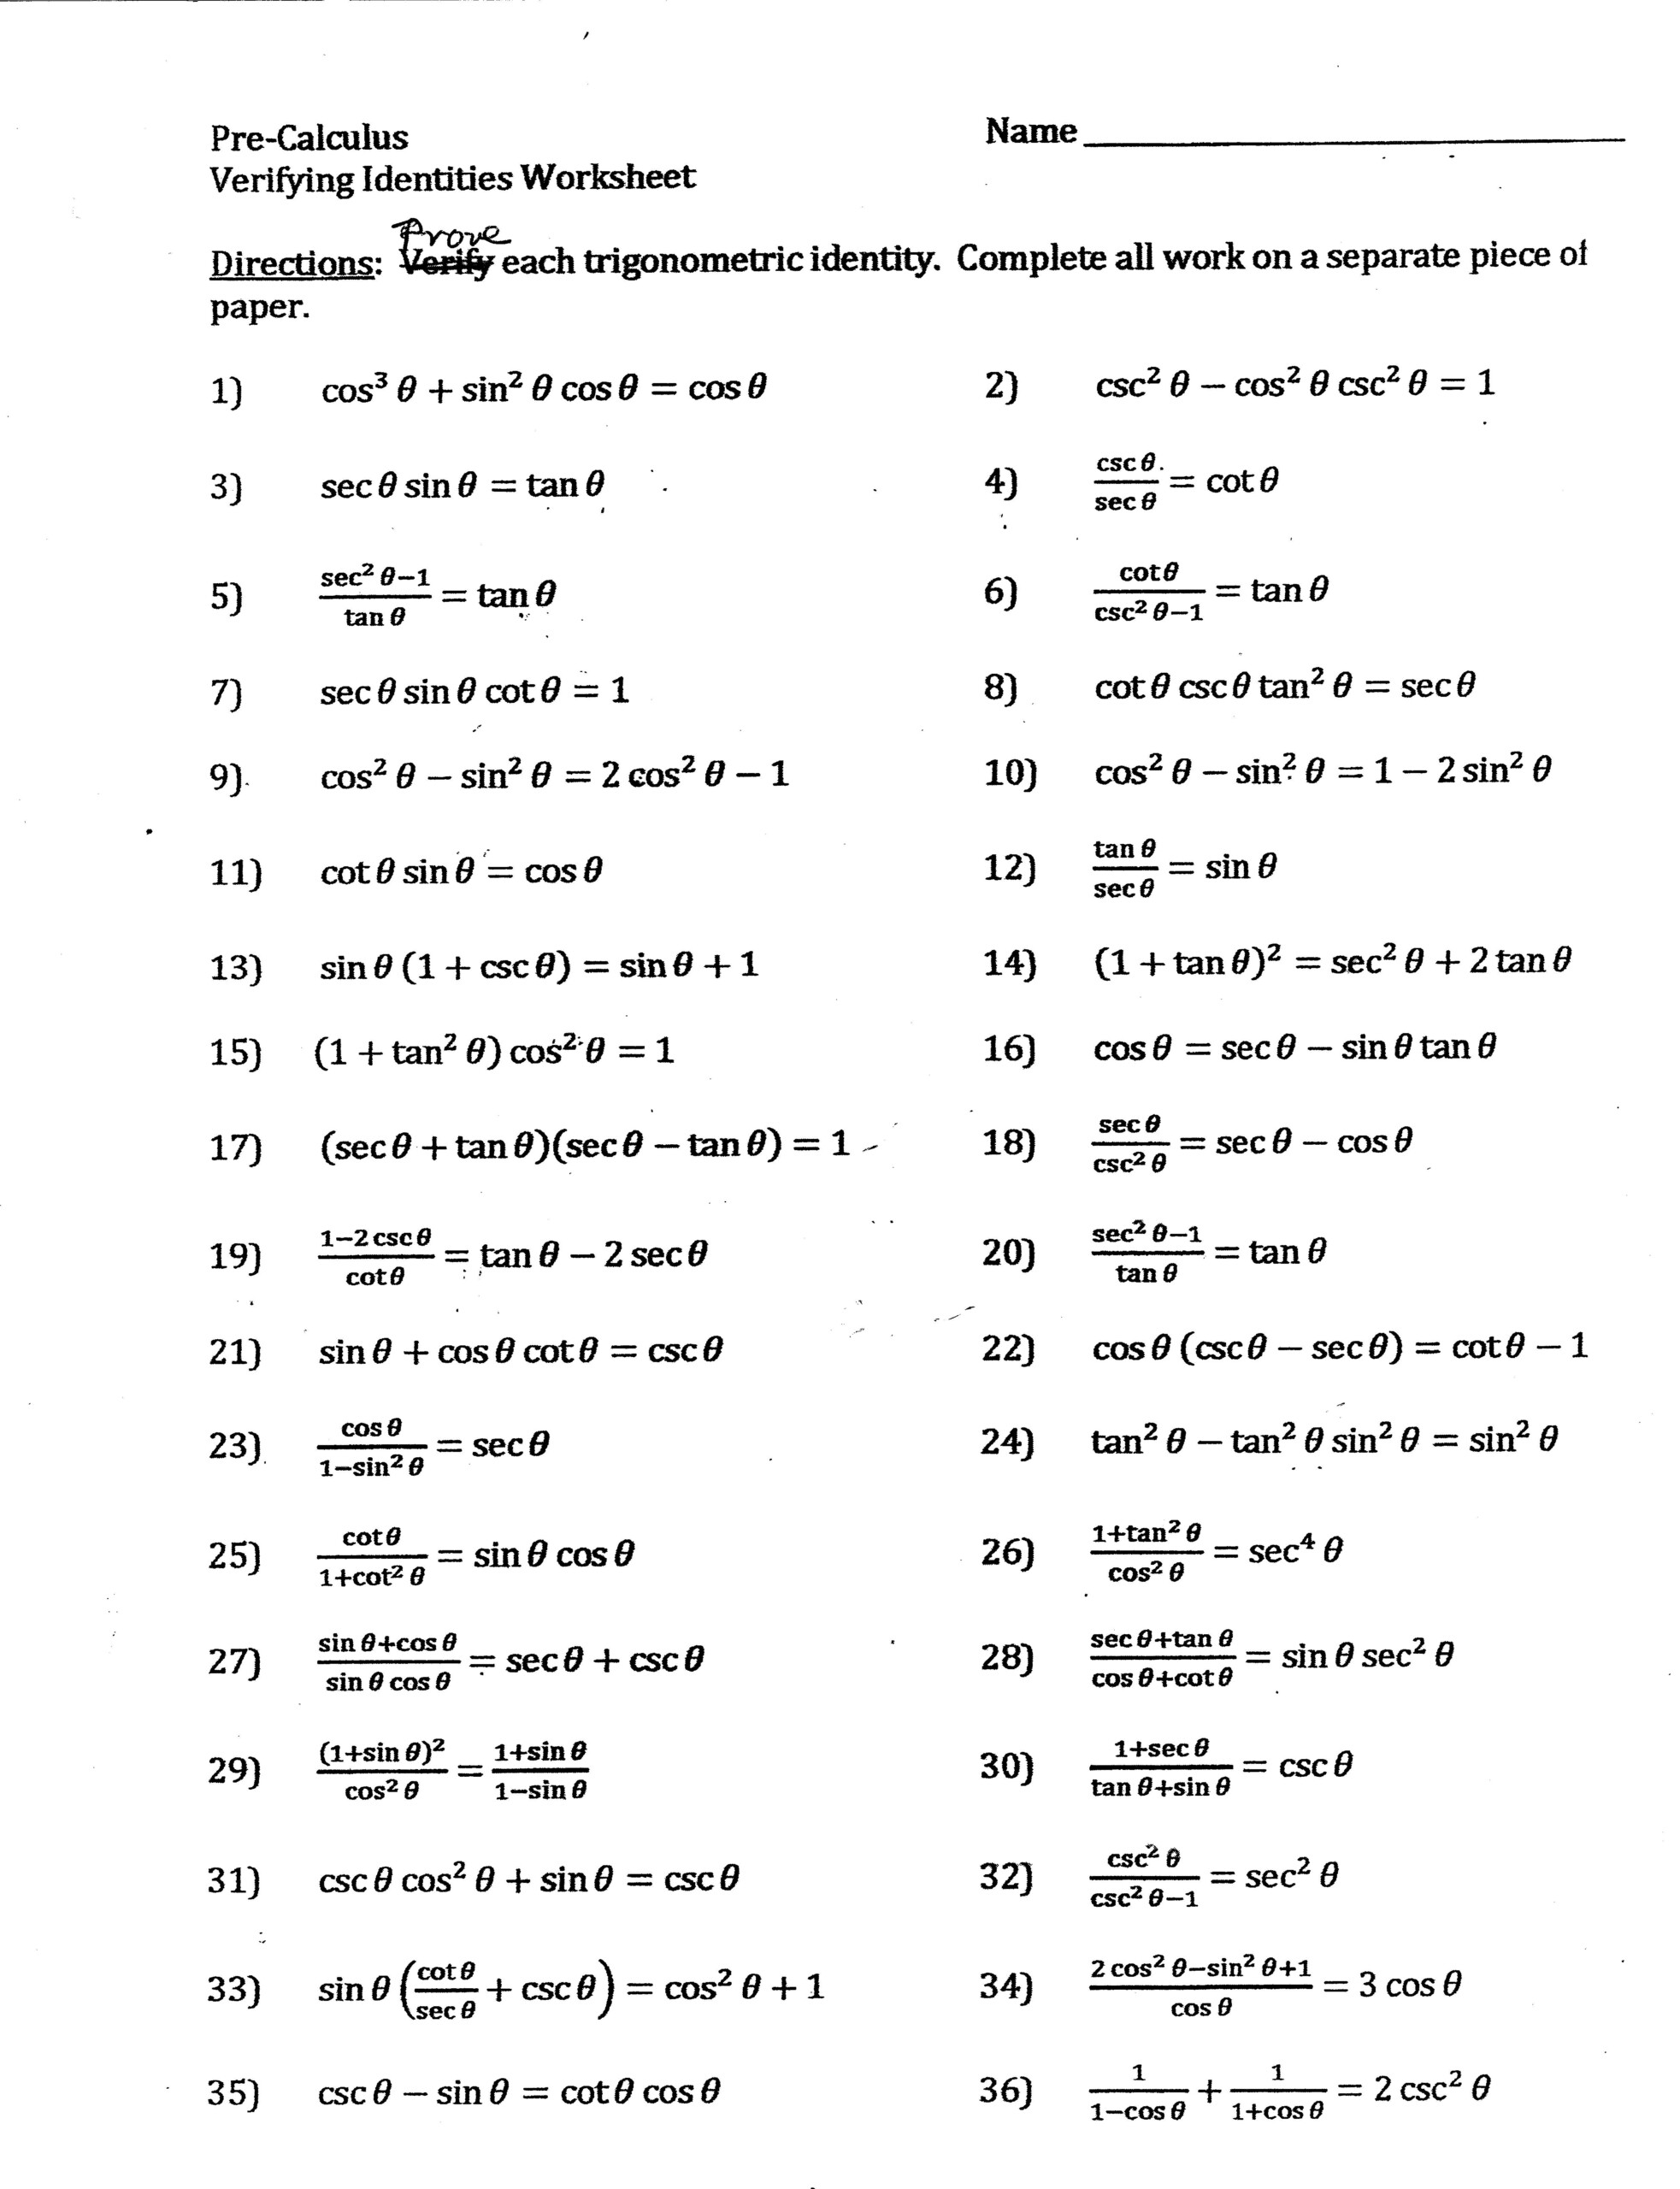 precalculus-composition-of-functions-worksheet-answers-pdf-function-worksheets